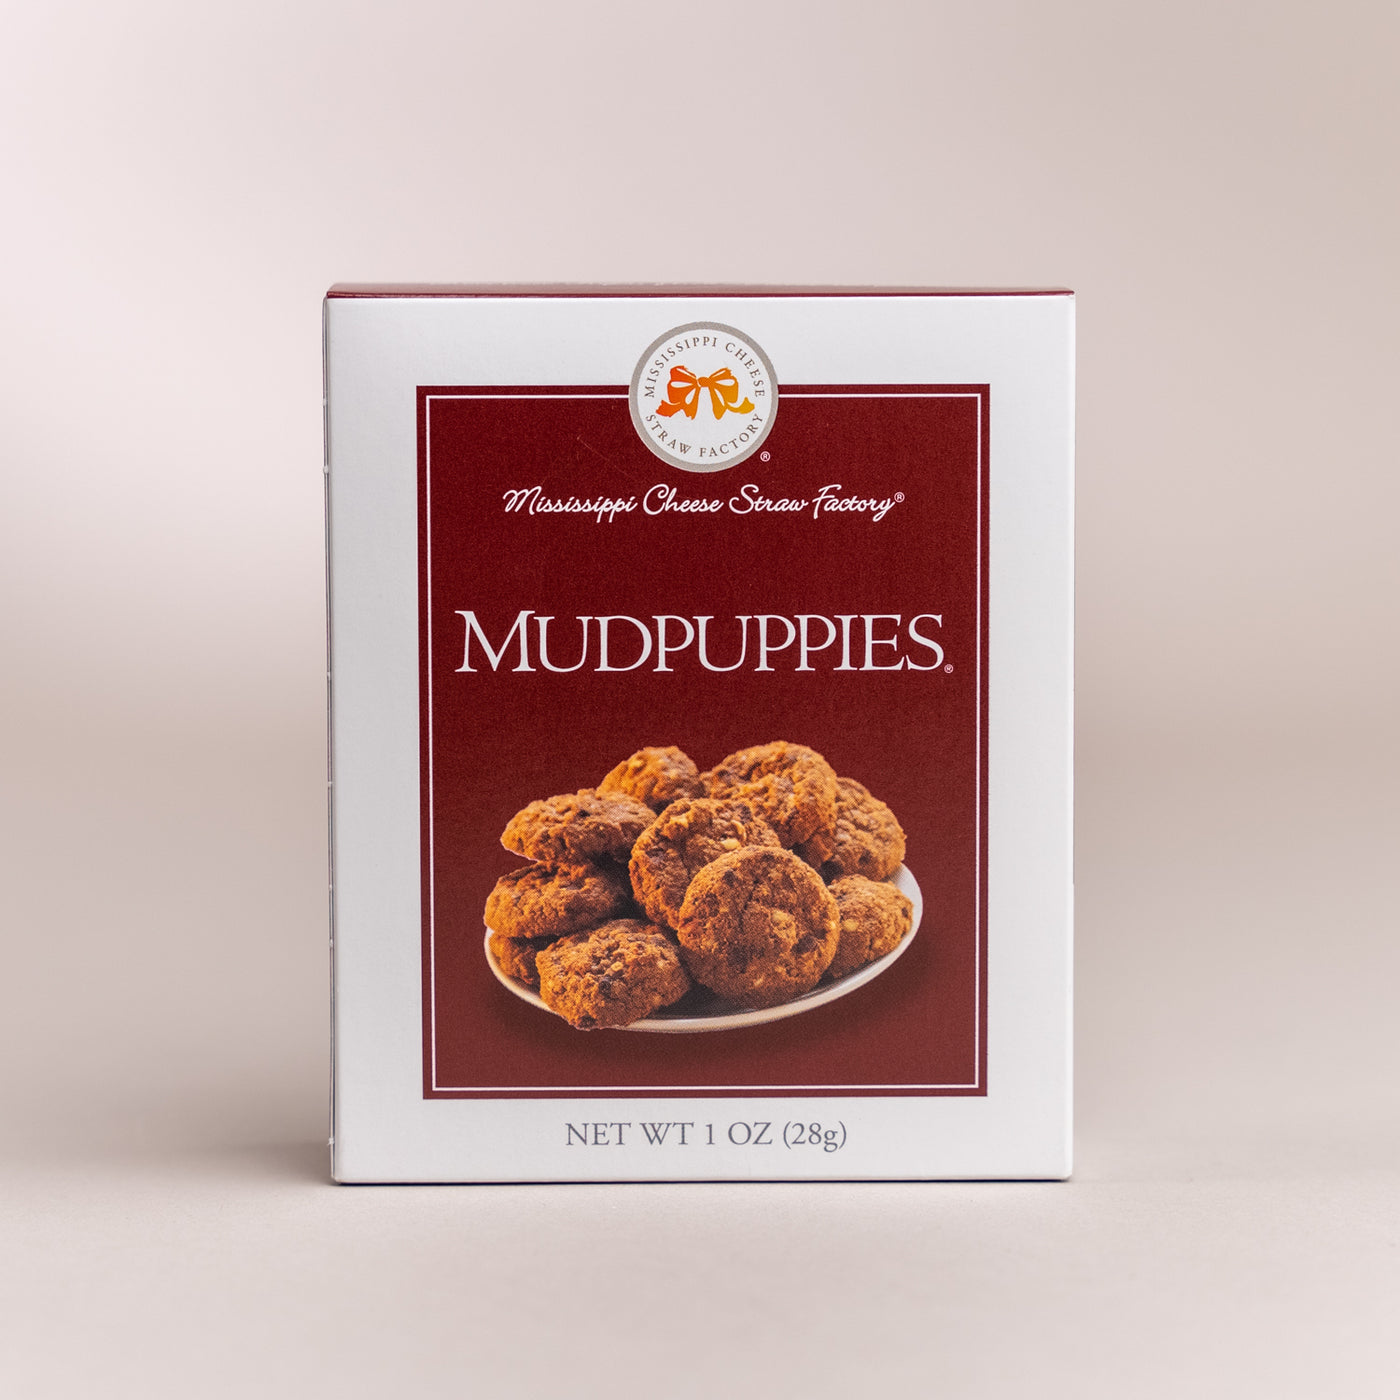 Mississippi Cheese Straw Factory Mudpuppies Cookies